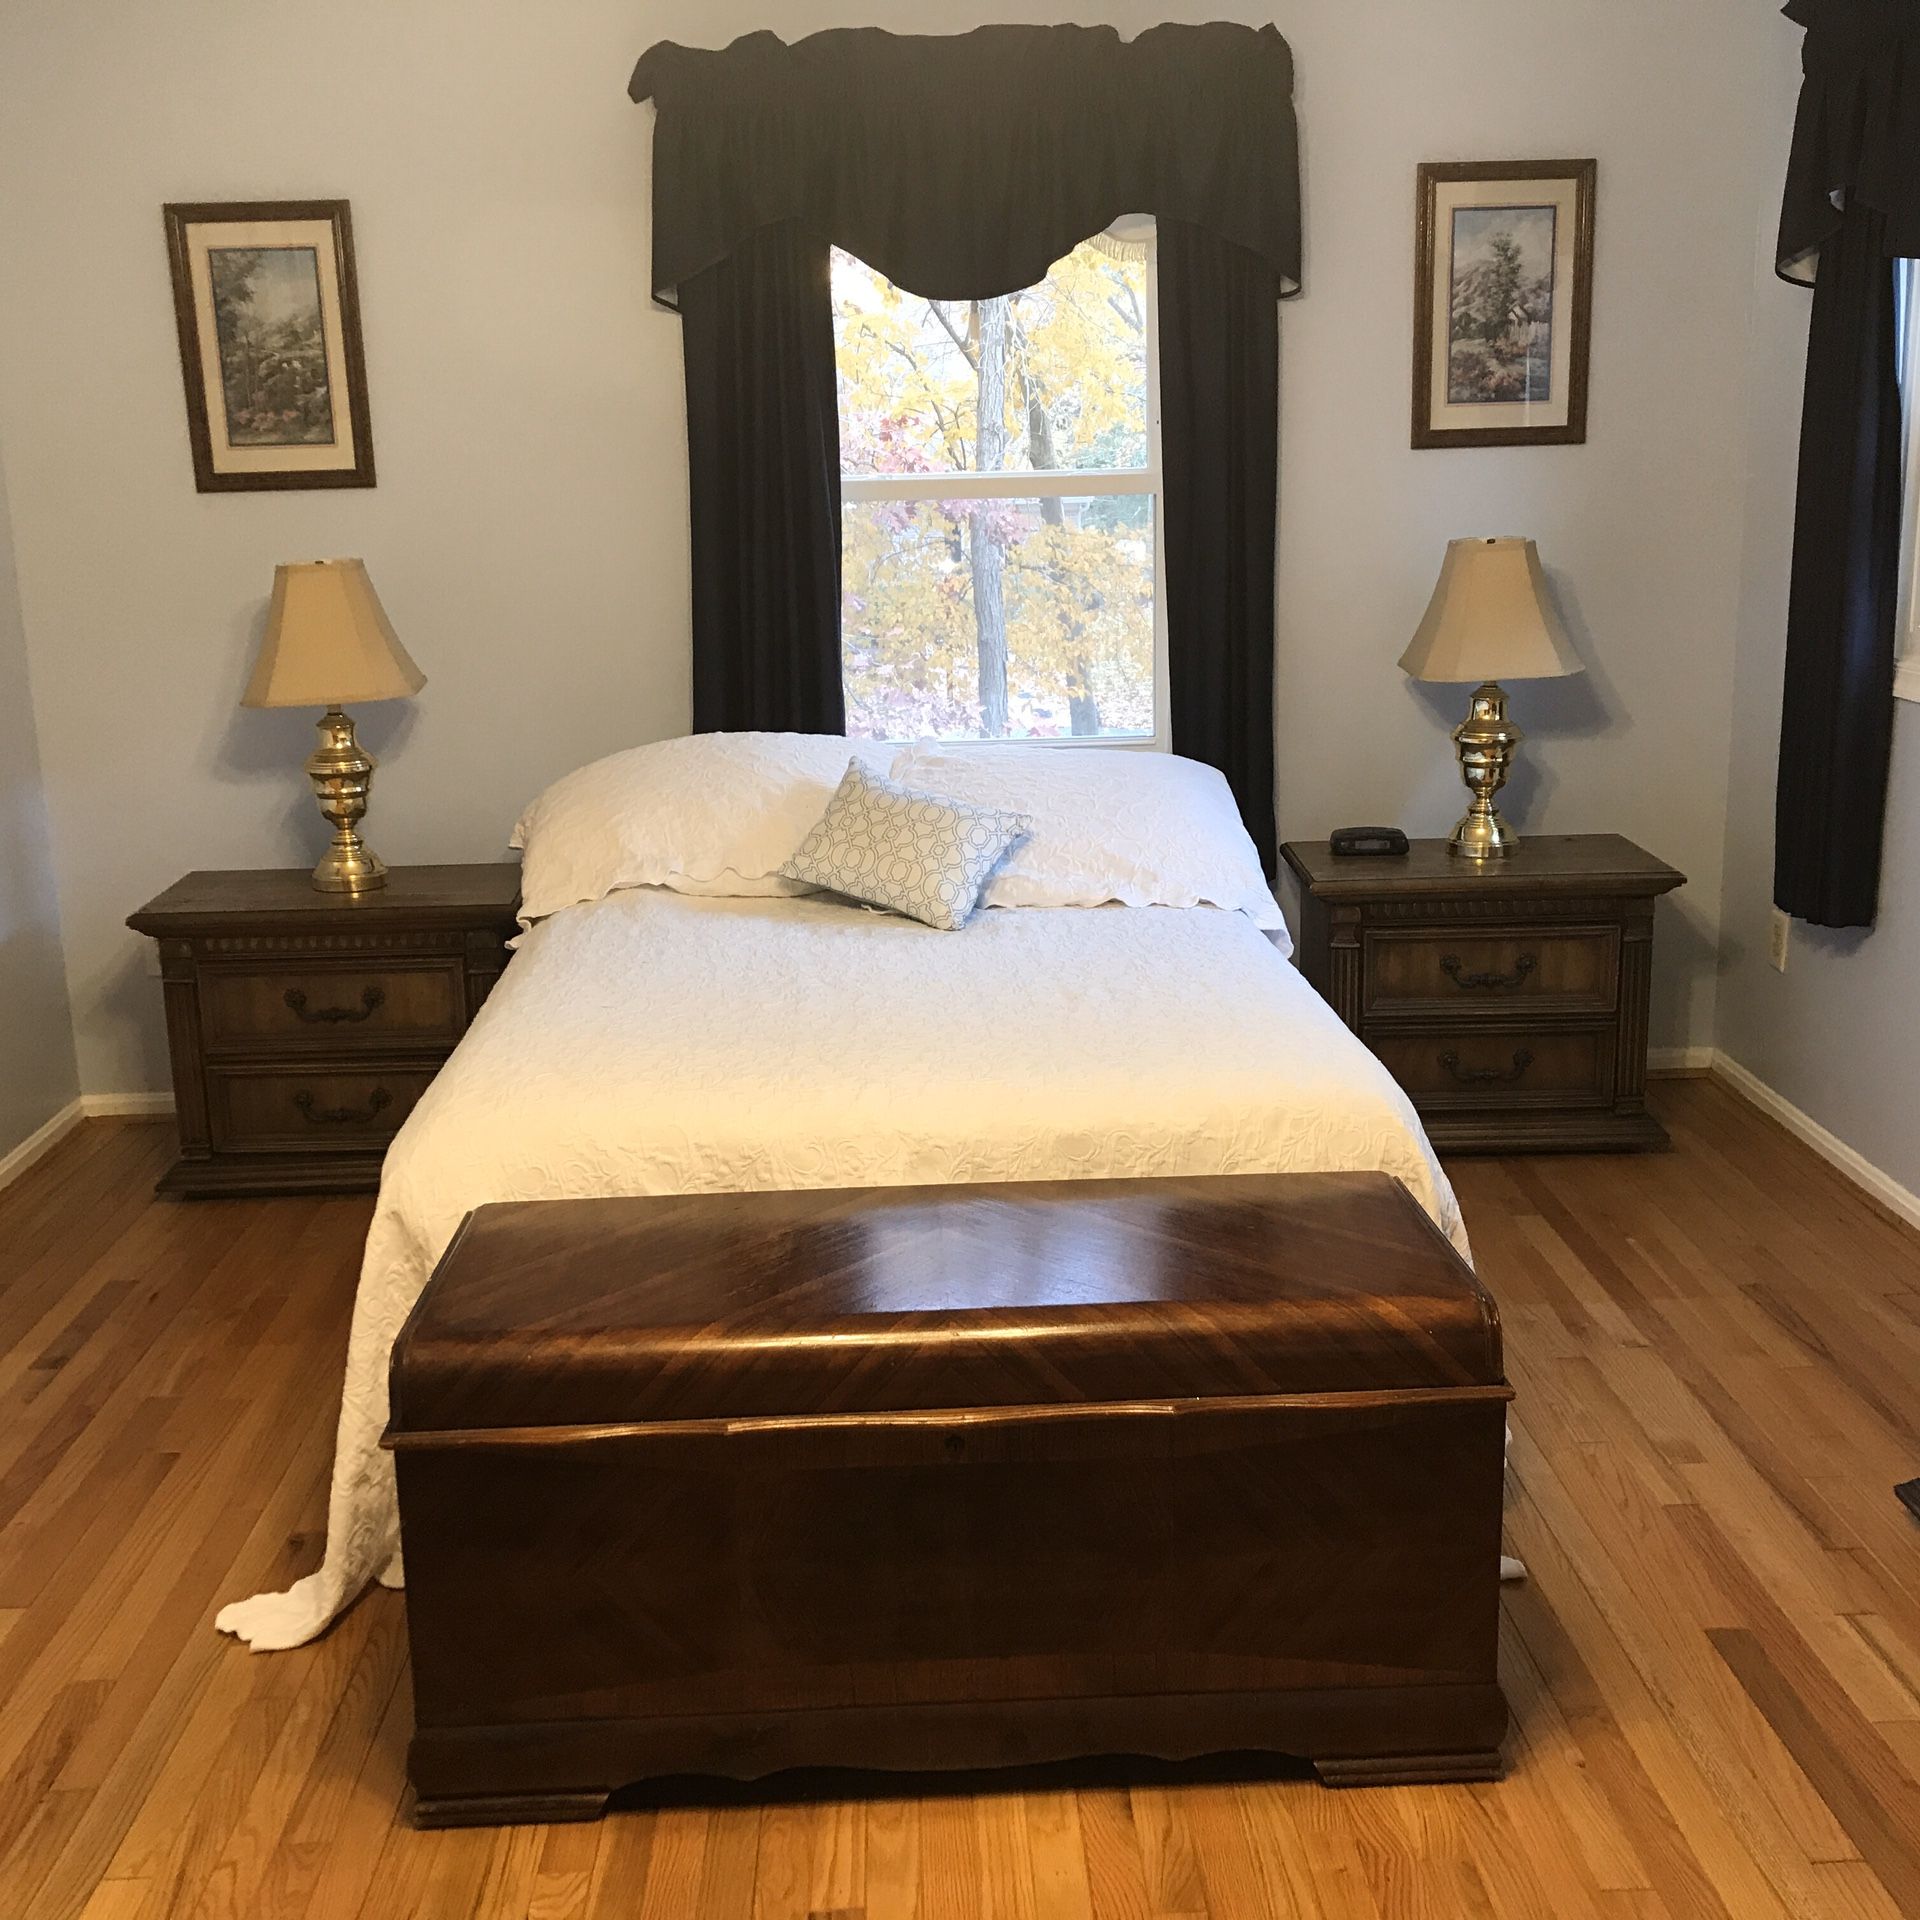 Double mattress, box springs and bed frame